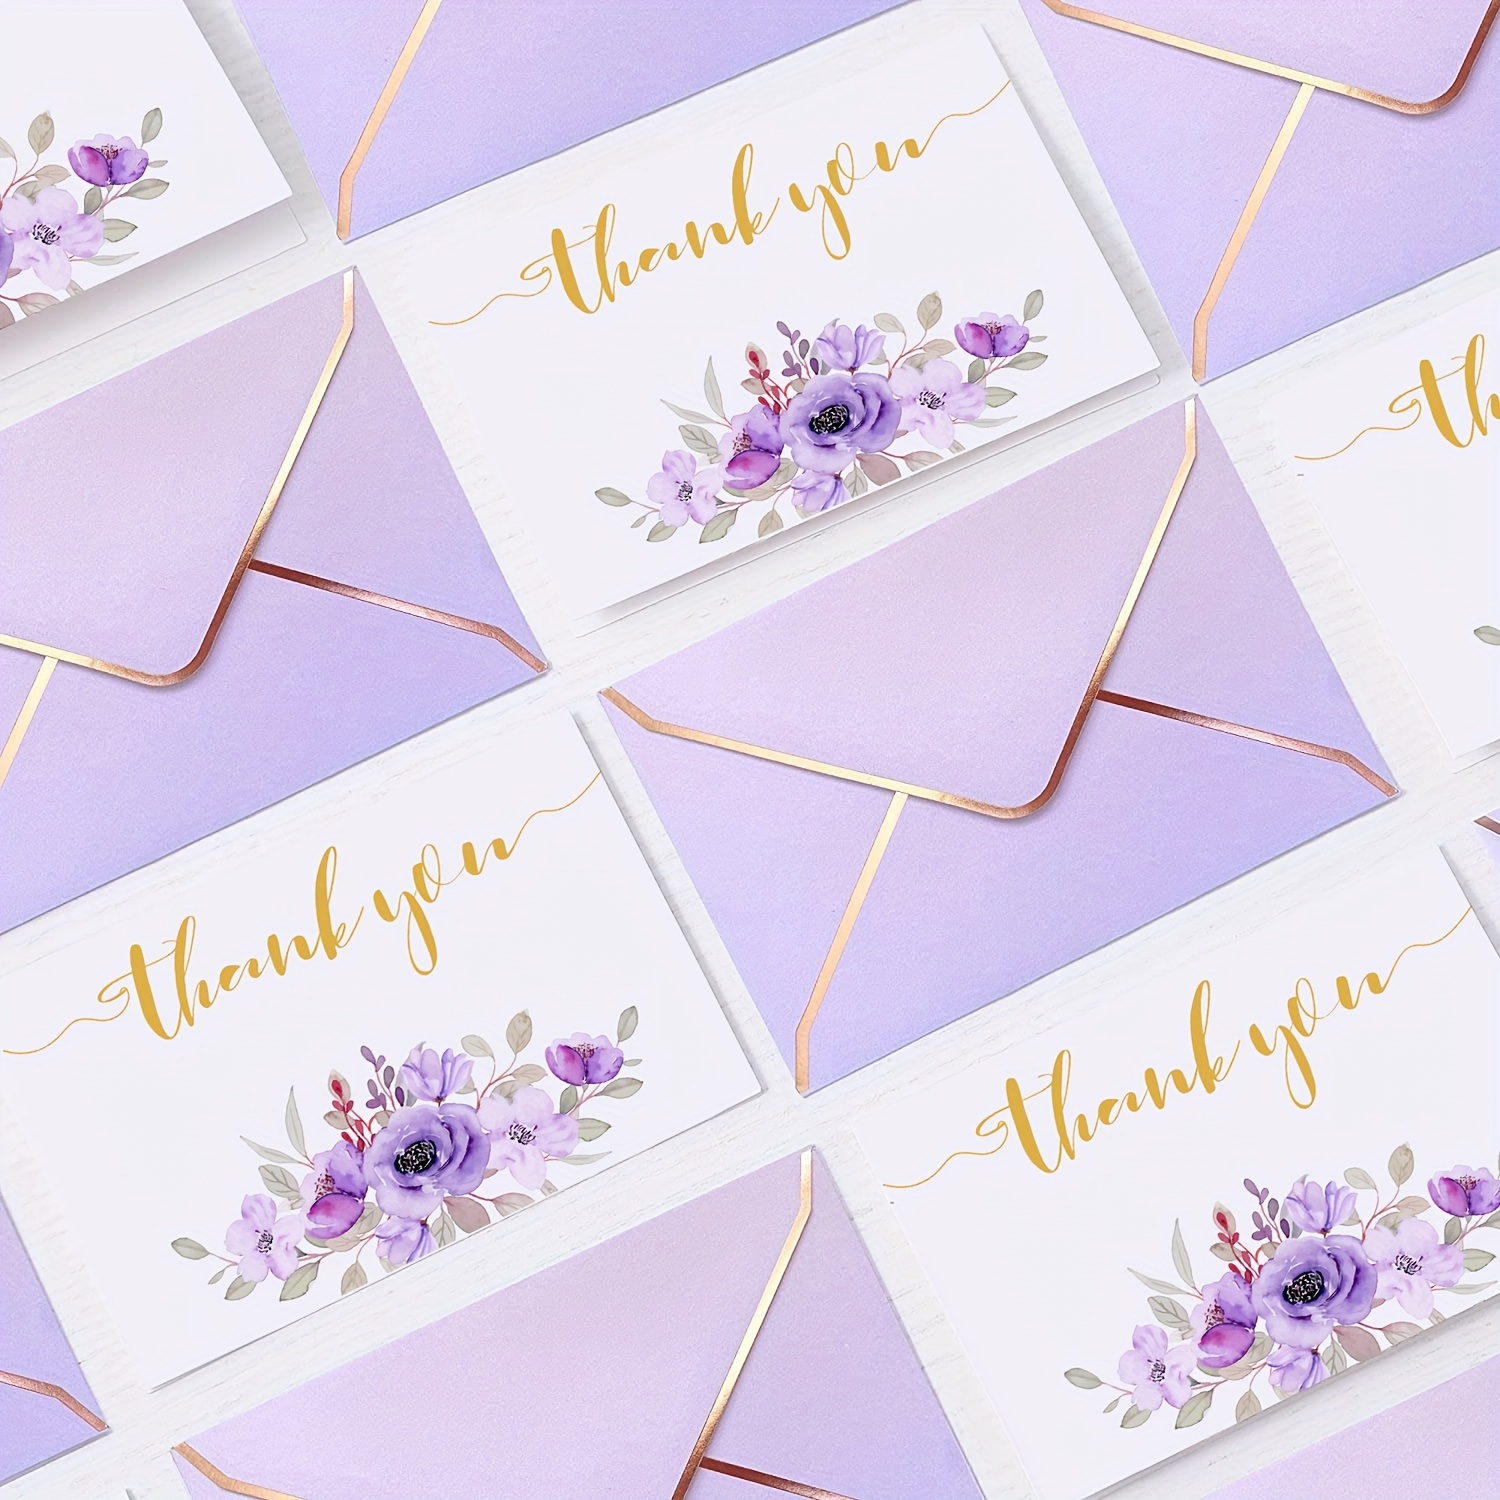 36pcs Thank You Cards with Envelopes,4x6 Thank You Cards Blank,Watercolor - Multicolor